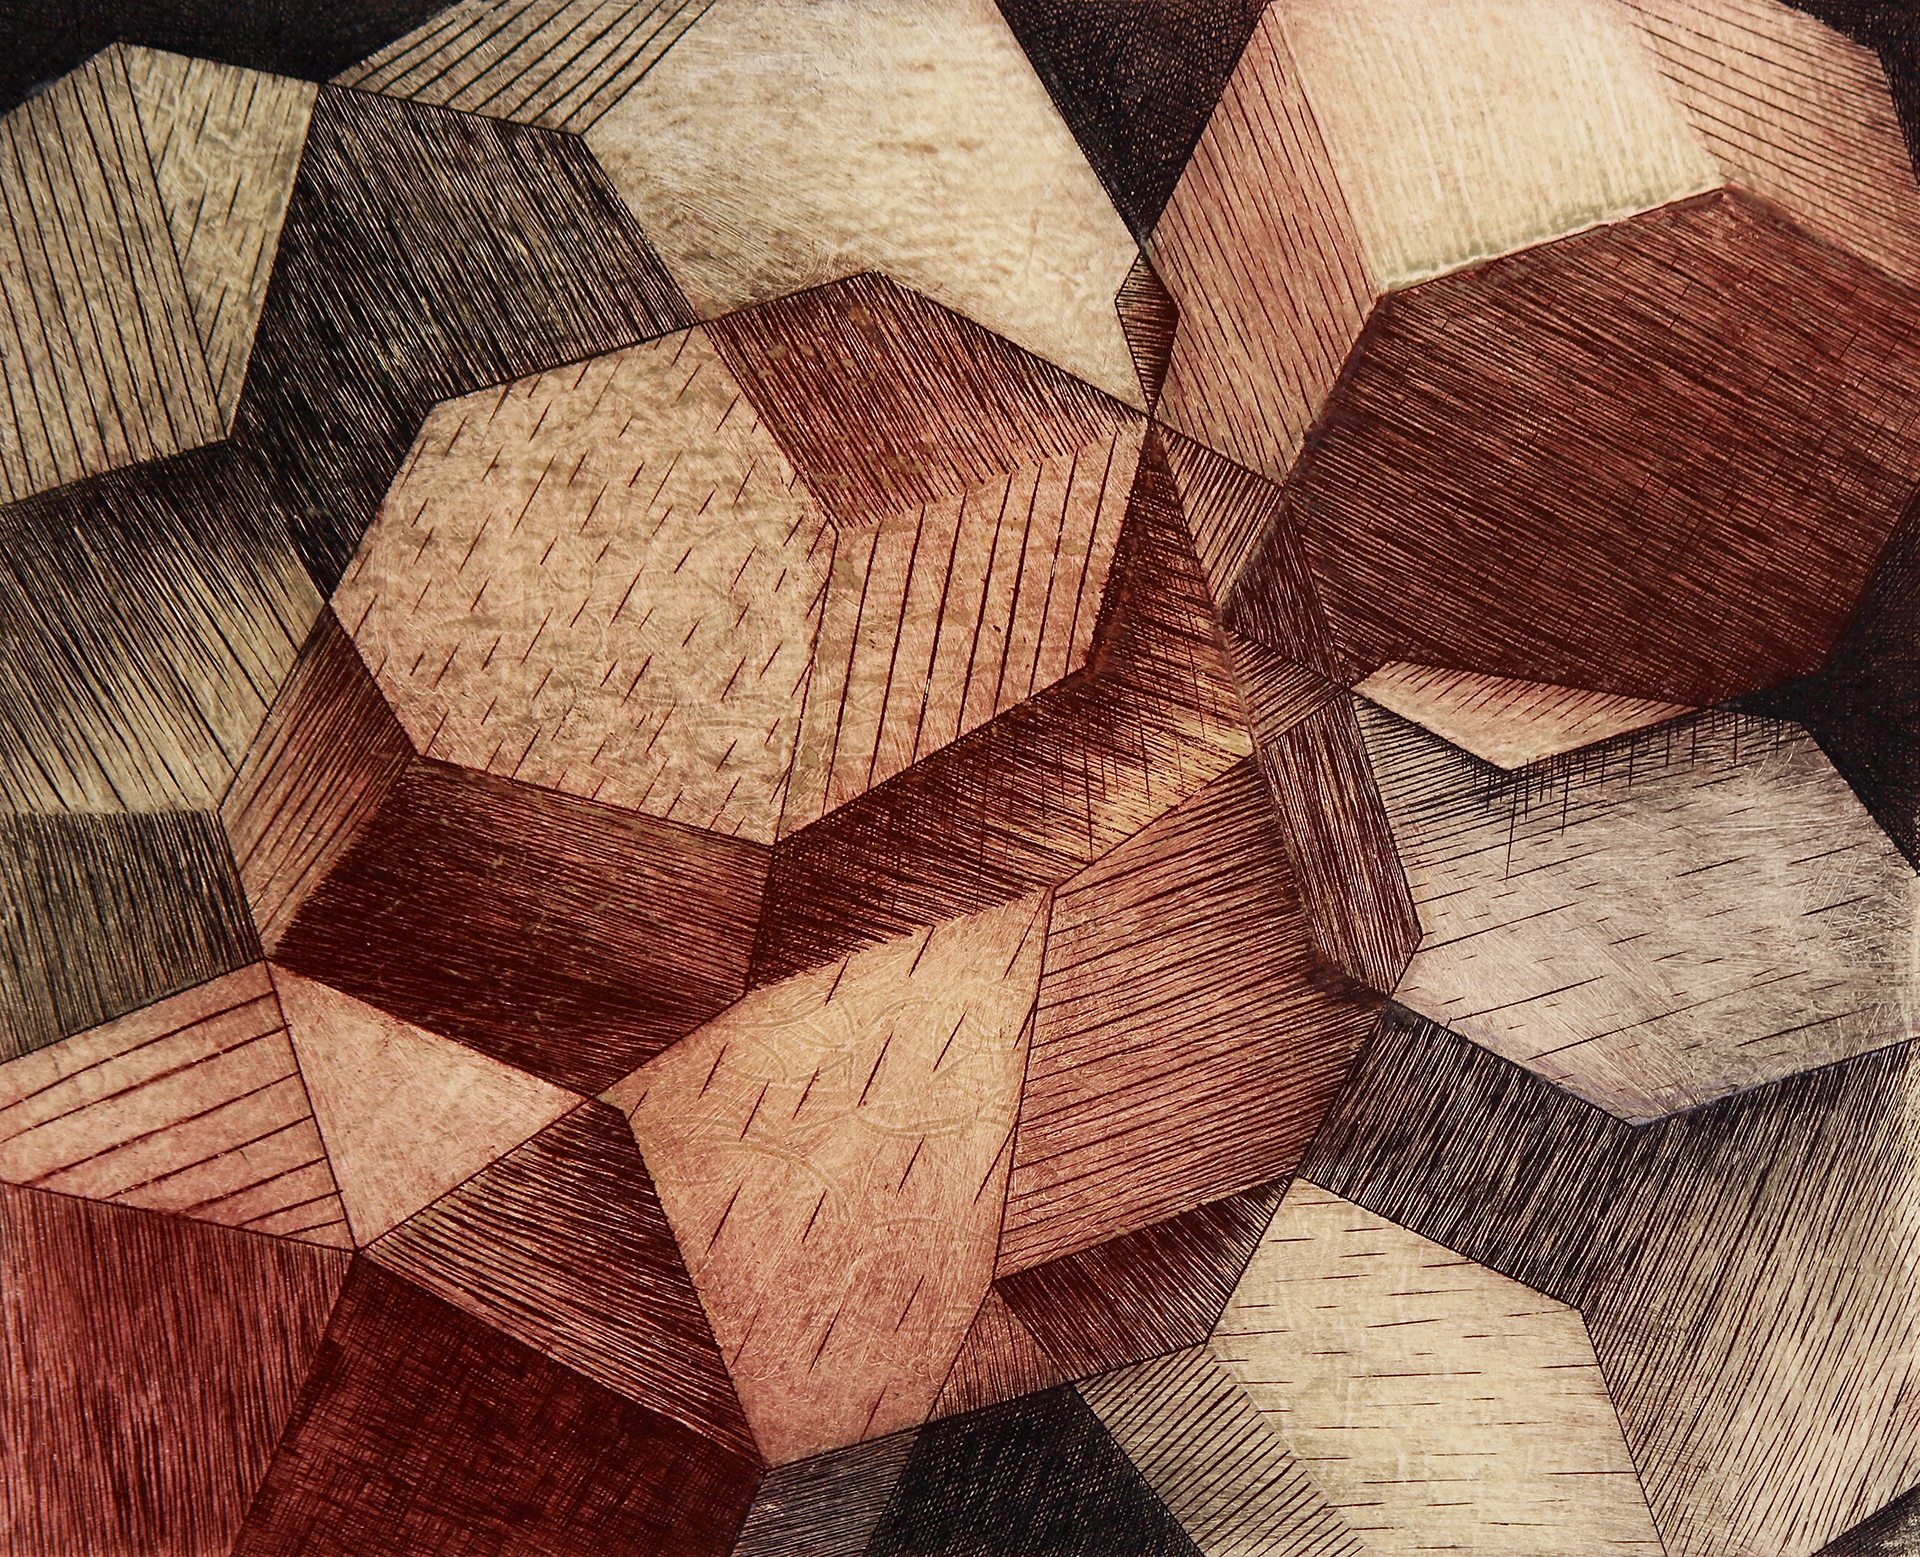 Essential Patterns of Perception: Eight (8); laser & hand engraving, collagraph; 10” x 12.5”, 2016 Eight varied textured hexagons in warm and cool colors fill the picture plane creating a deep visual space.